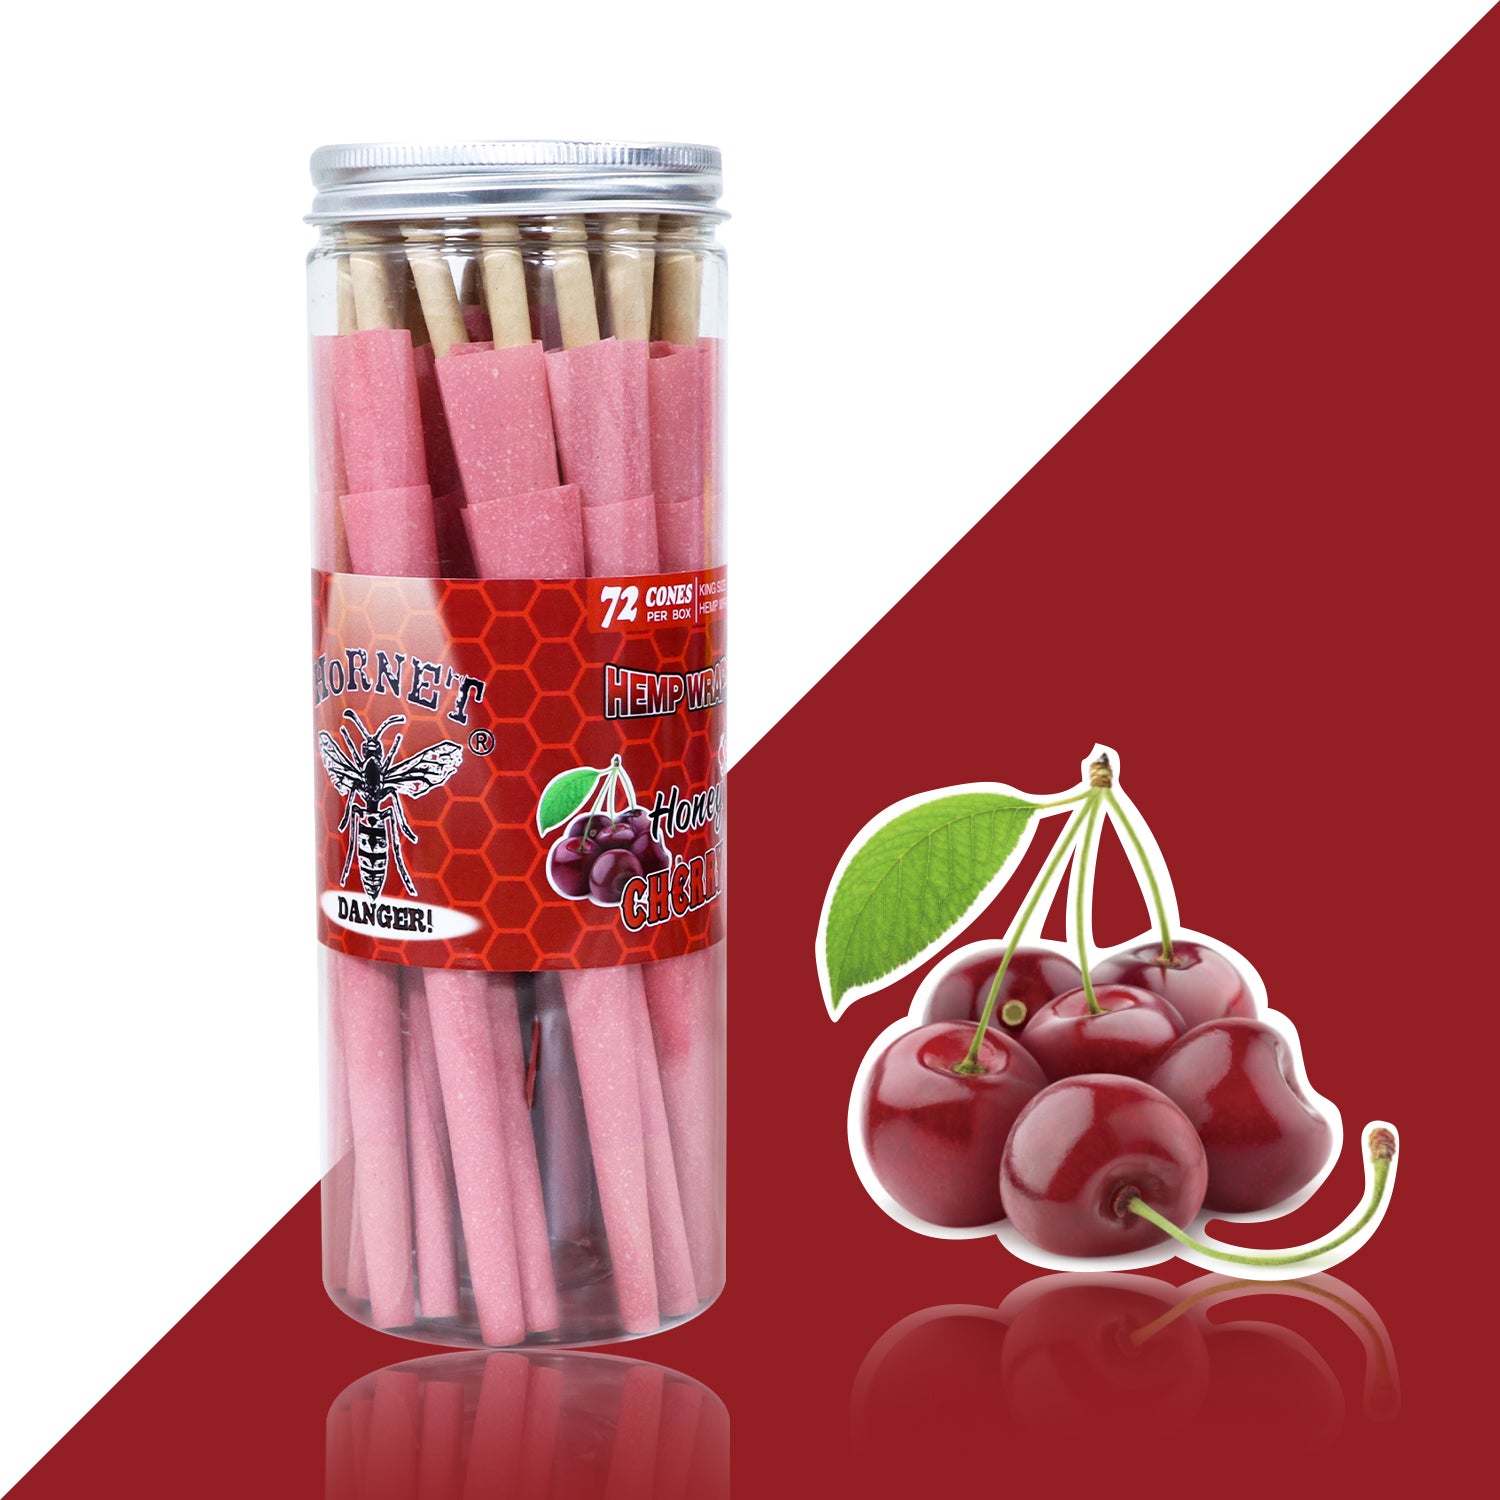 HORNET Cherry Flavored Pink Pre Rolled Cones, King Size Pre Rolled Rolling Paper with tips, Slow Burning Rolling Cones & load, 72 PCS / Jar